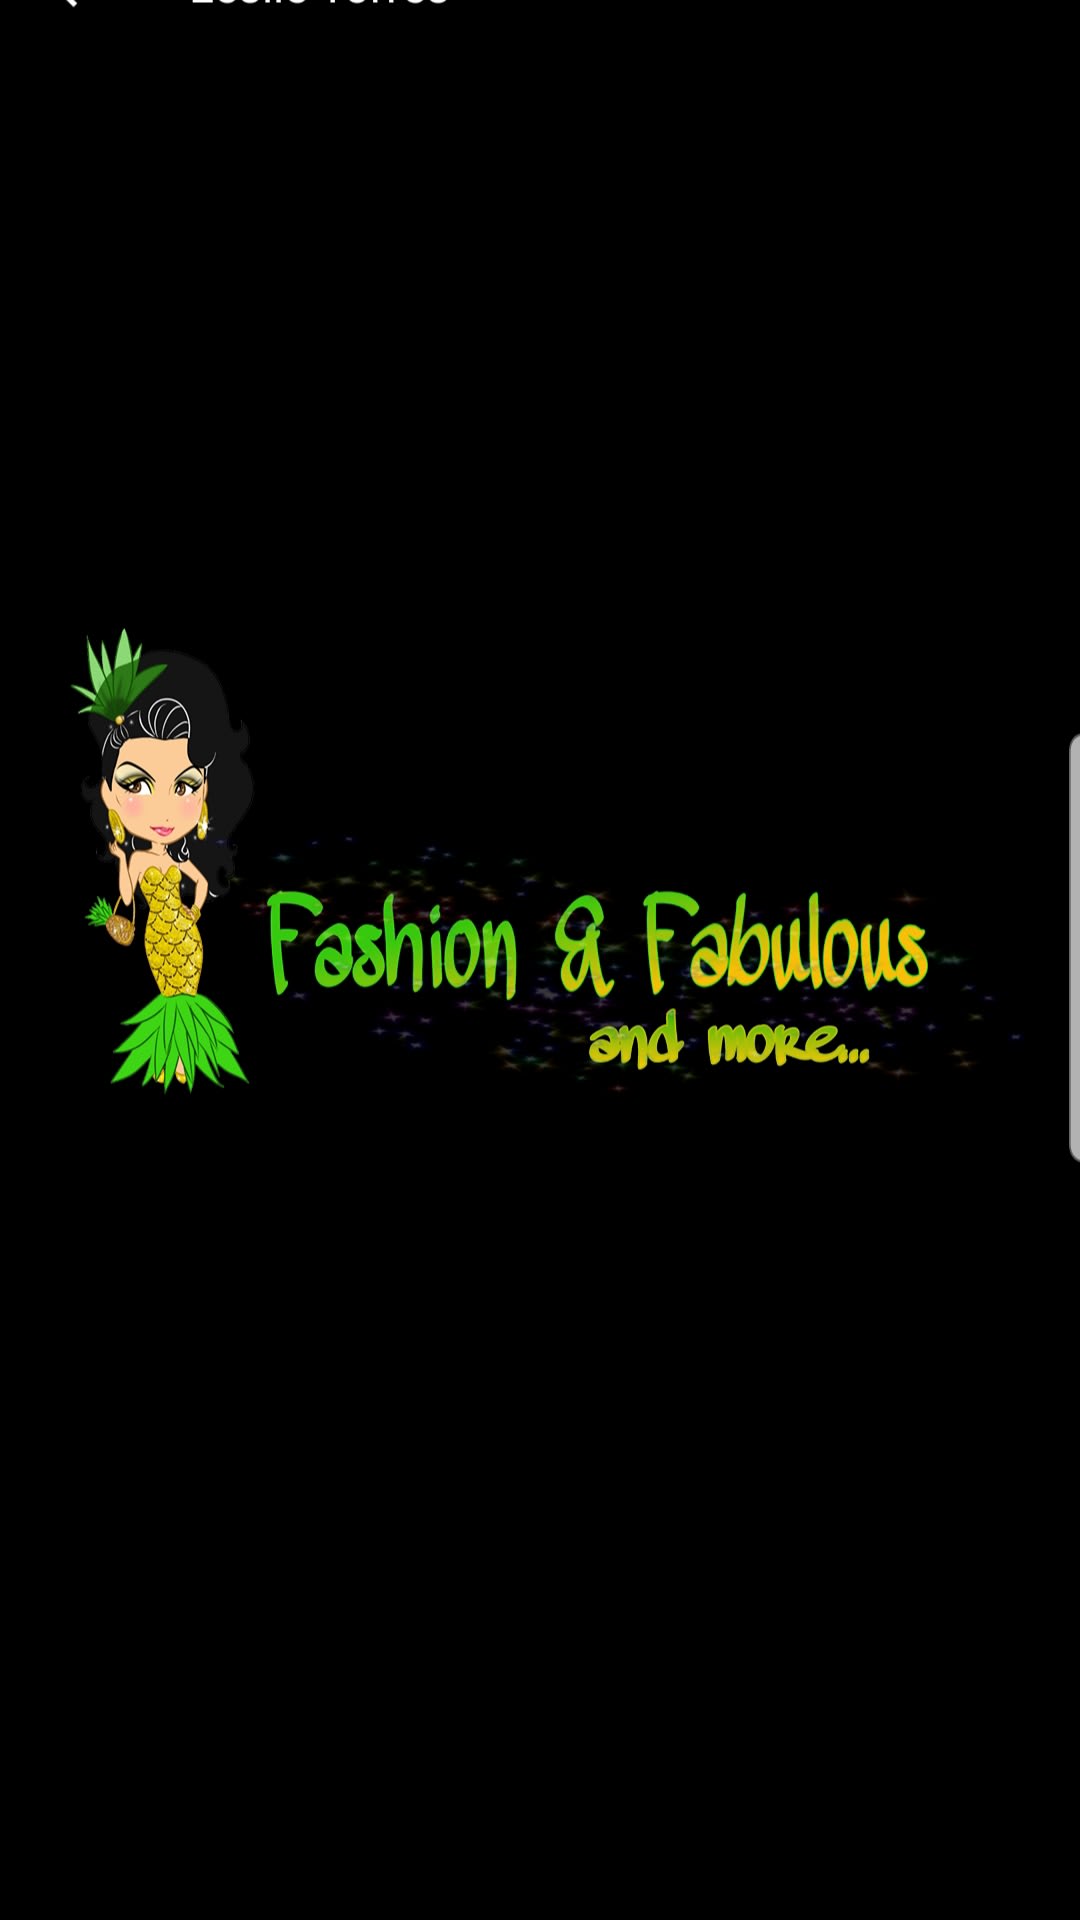 Fashion & Fabulous and More